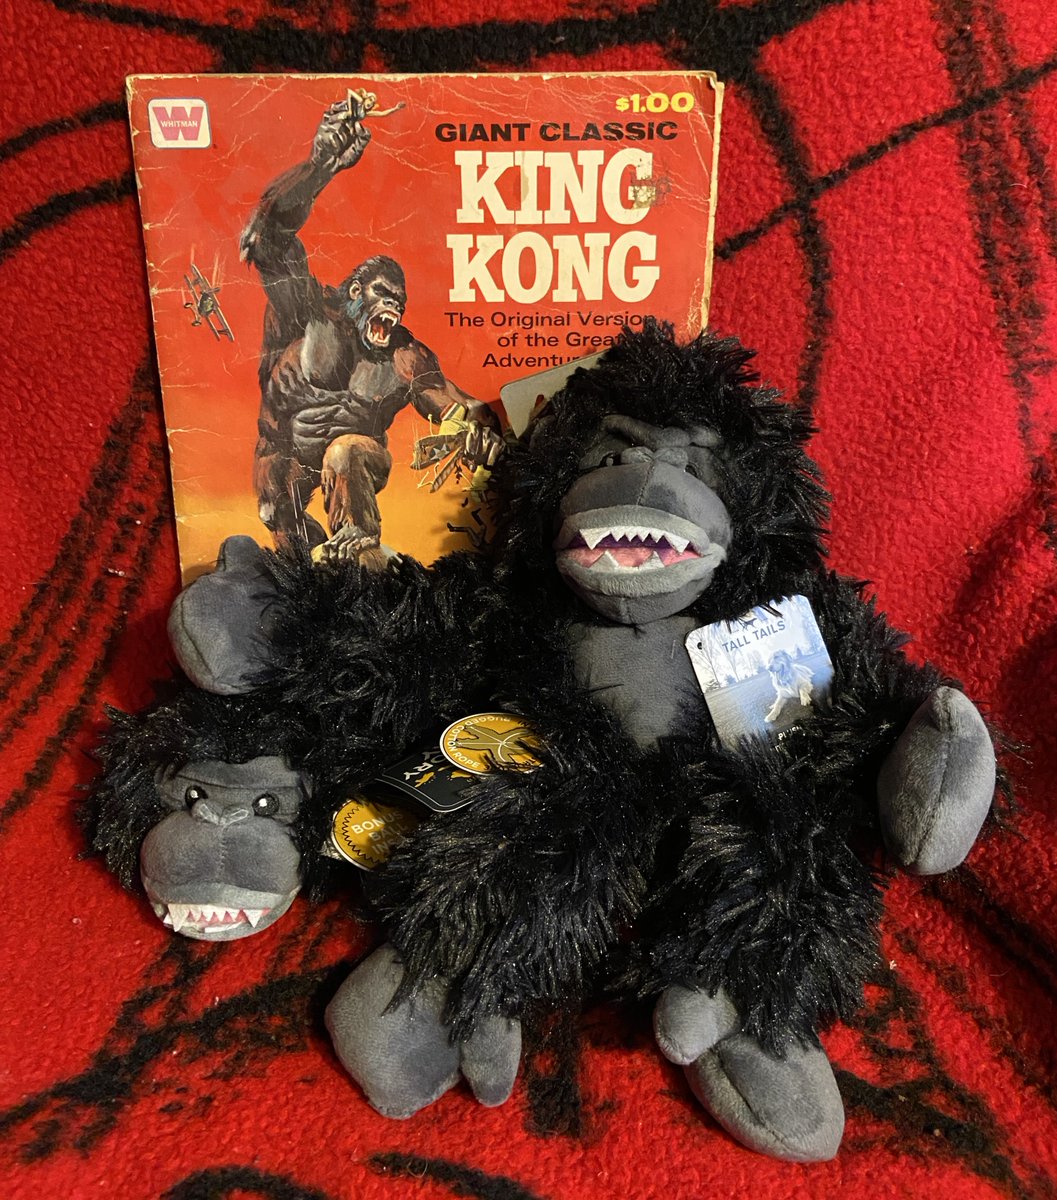 To celebrate #GodzillaXKong: The New Empire being the #1 movie at the U.S. box office, this week's #FreebieFriday giveaway prizes are this @TallTailsTrail Gorilla Rope Body Dog Toy and 2-in-1 Fetch Ball Dog Toy. Visit Pet Age on IG for giveaway details. #KingKong #Godzilla #pets